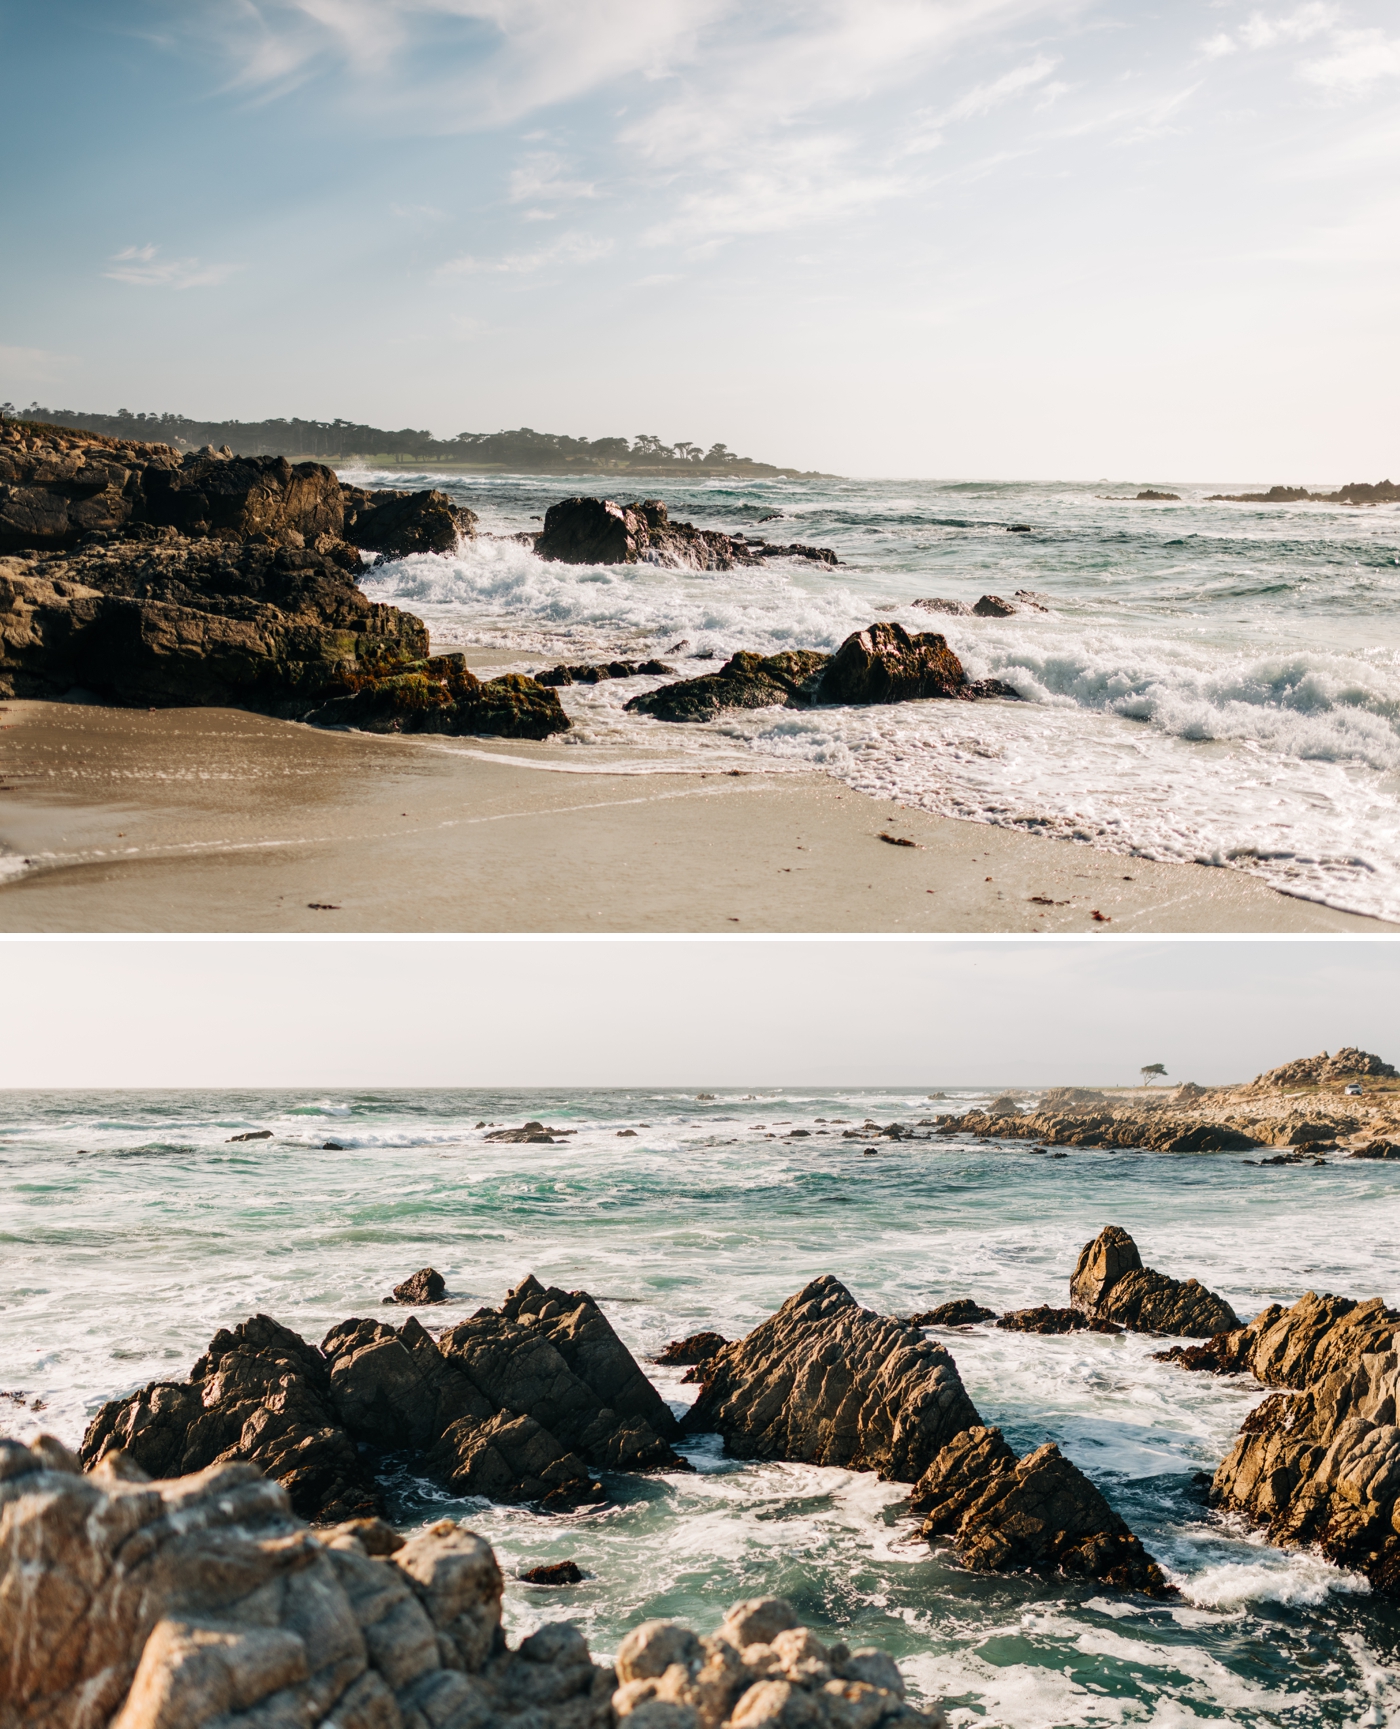 A day trip to Monterey